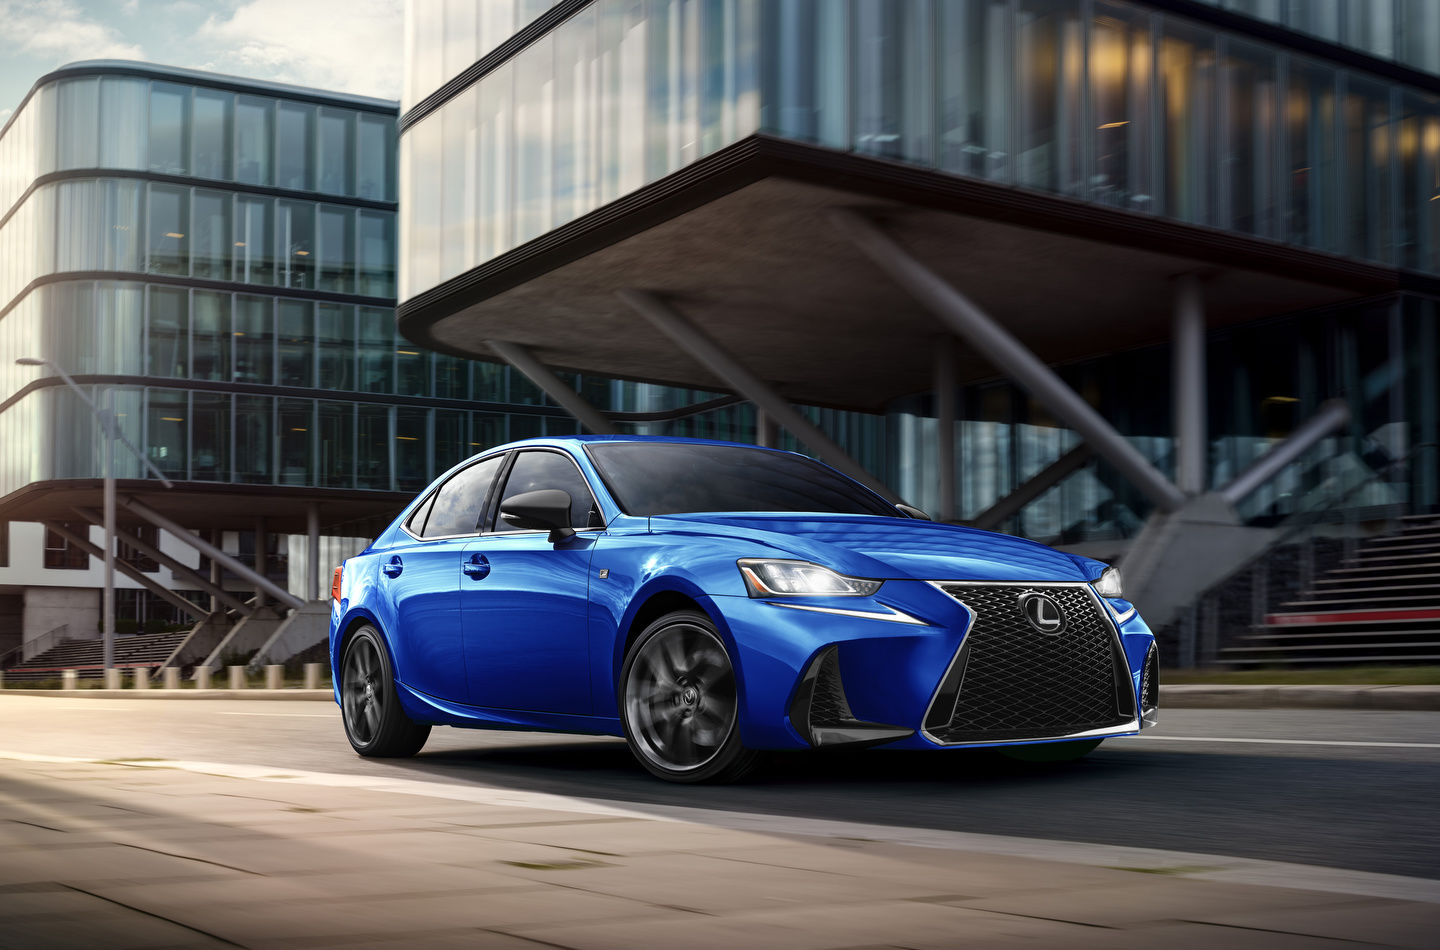 Why buy a Lexus certified pre-owned vehicle?